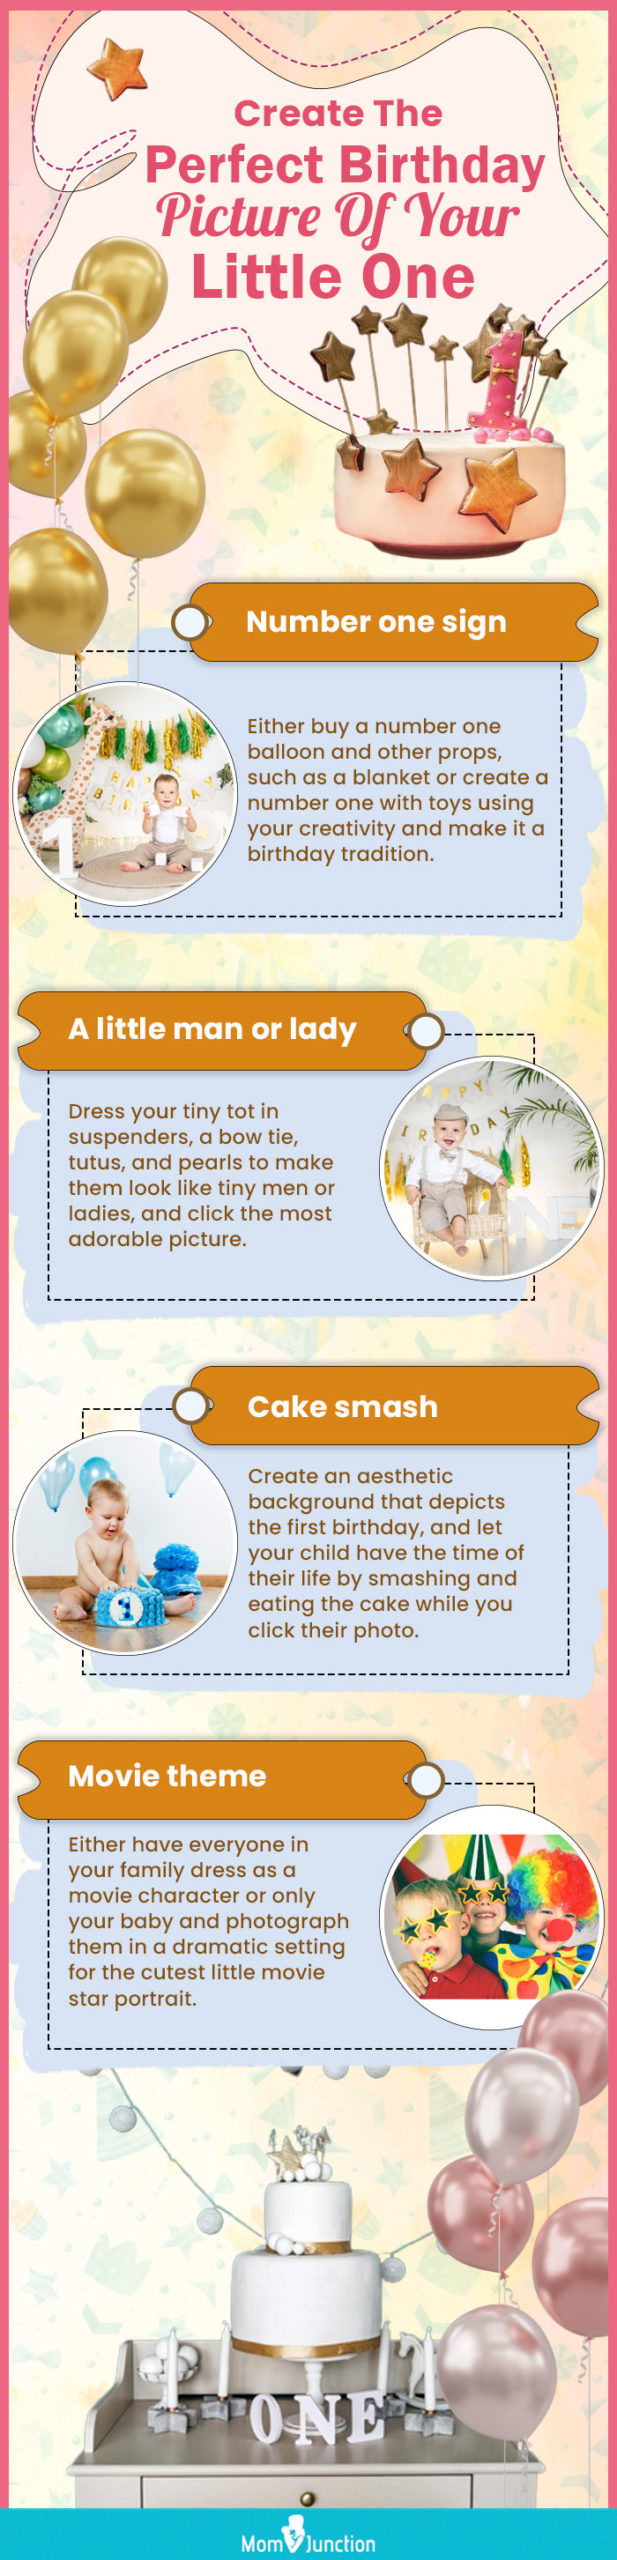 create the perfect birthday picture of your little (infographic)